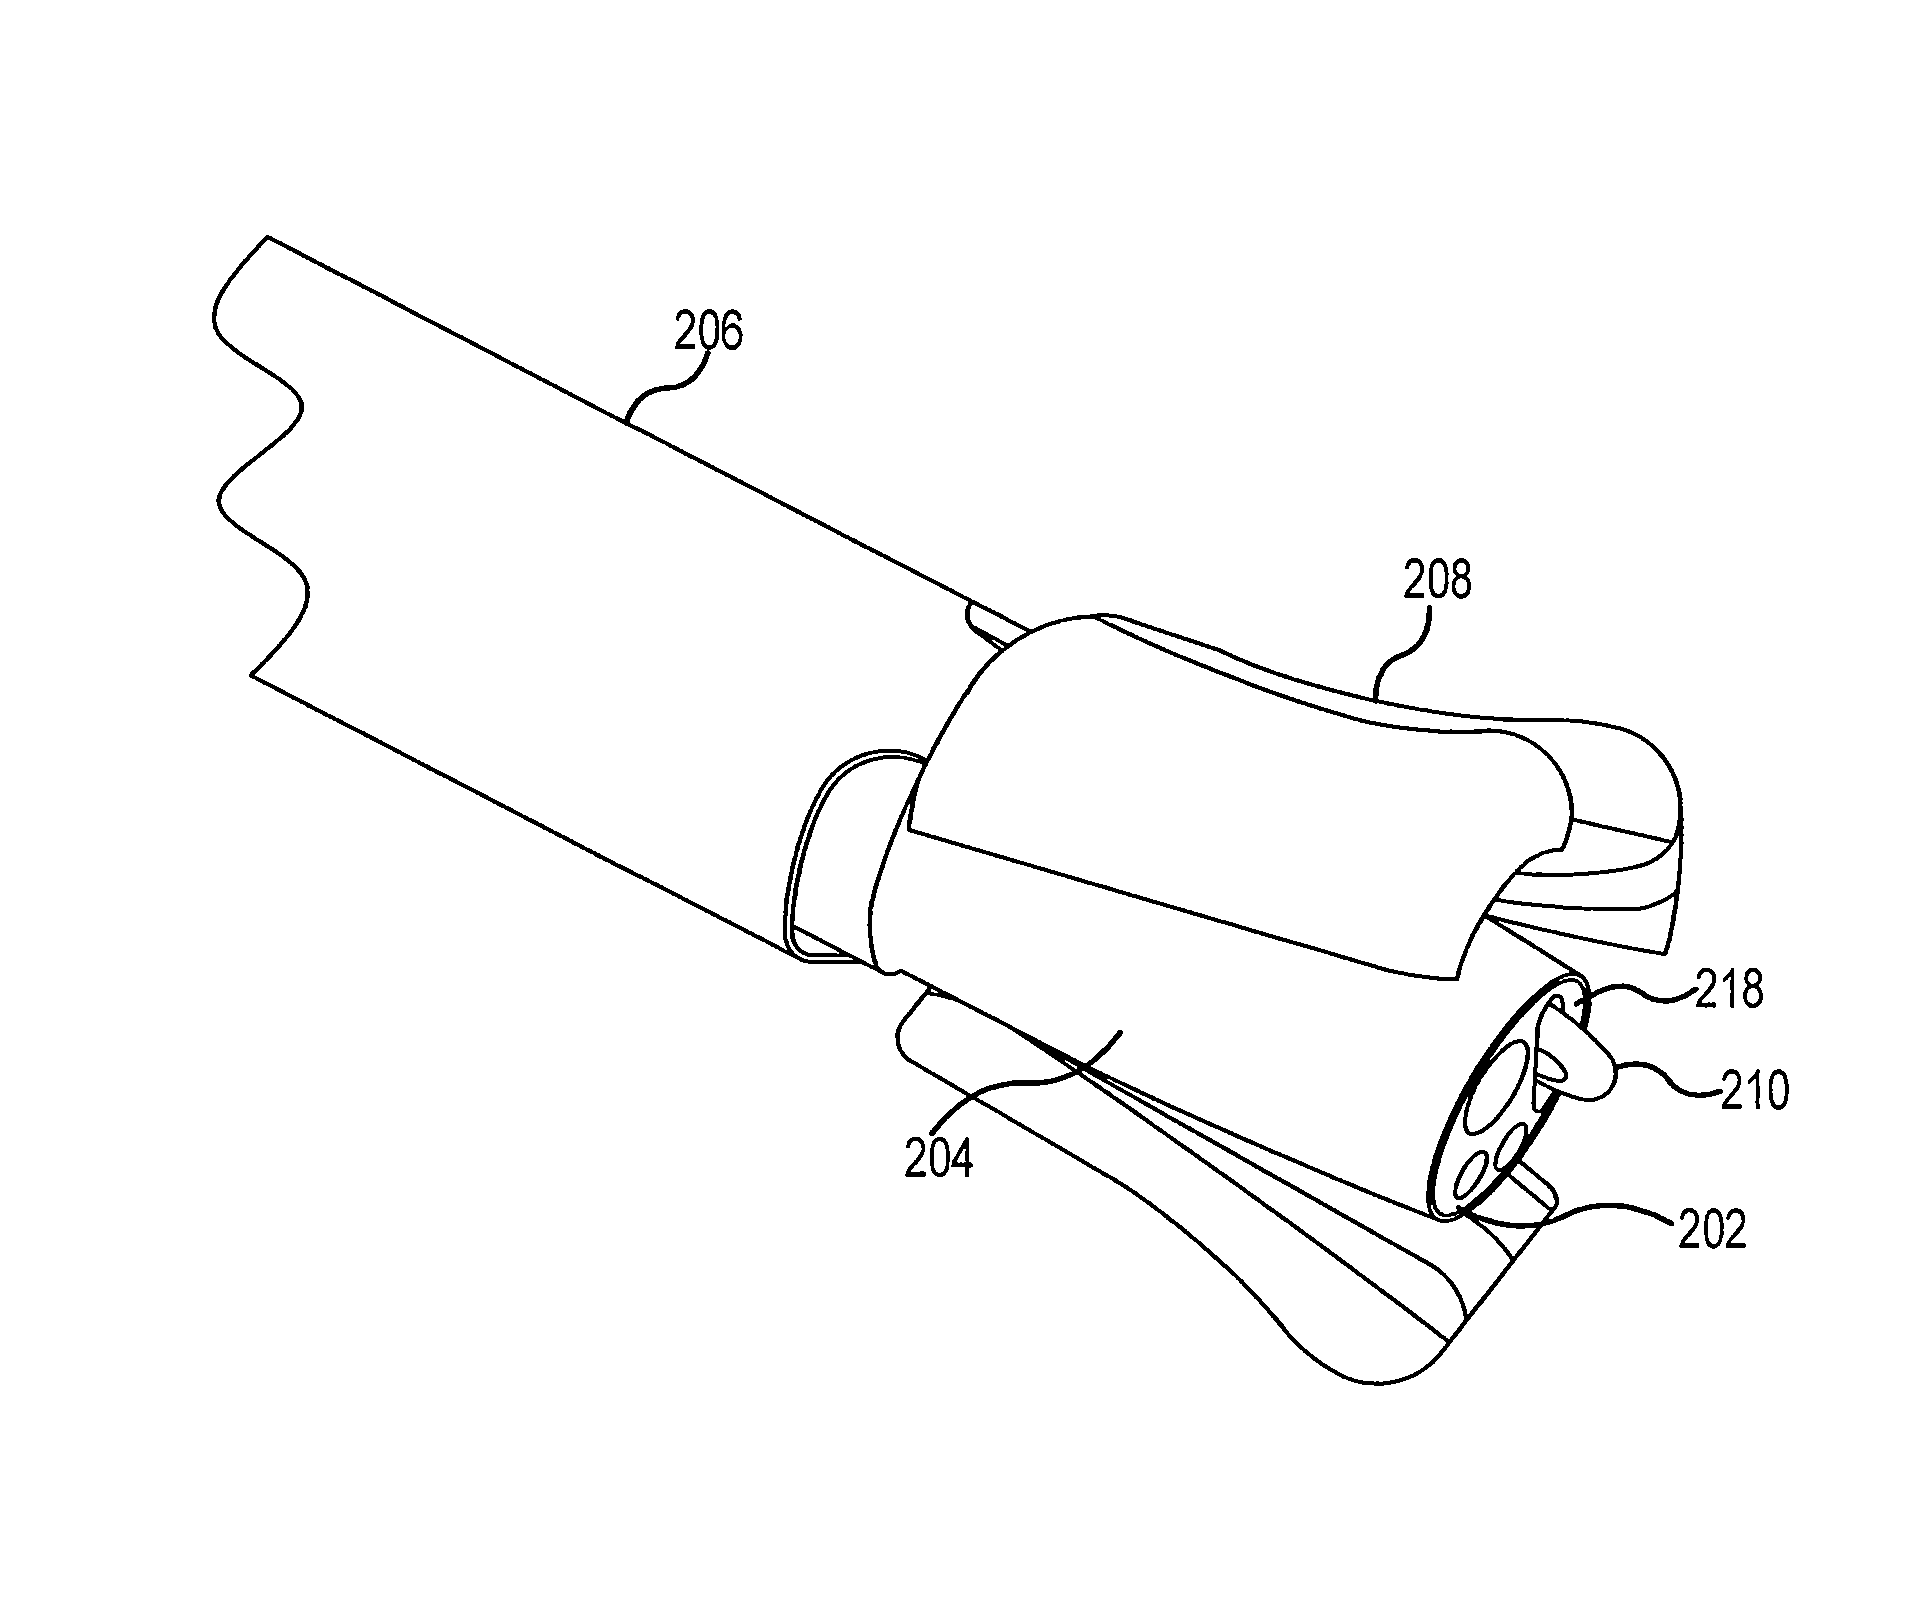 Endoscopic system for accessing constrained surgical spaces